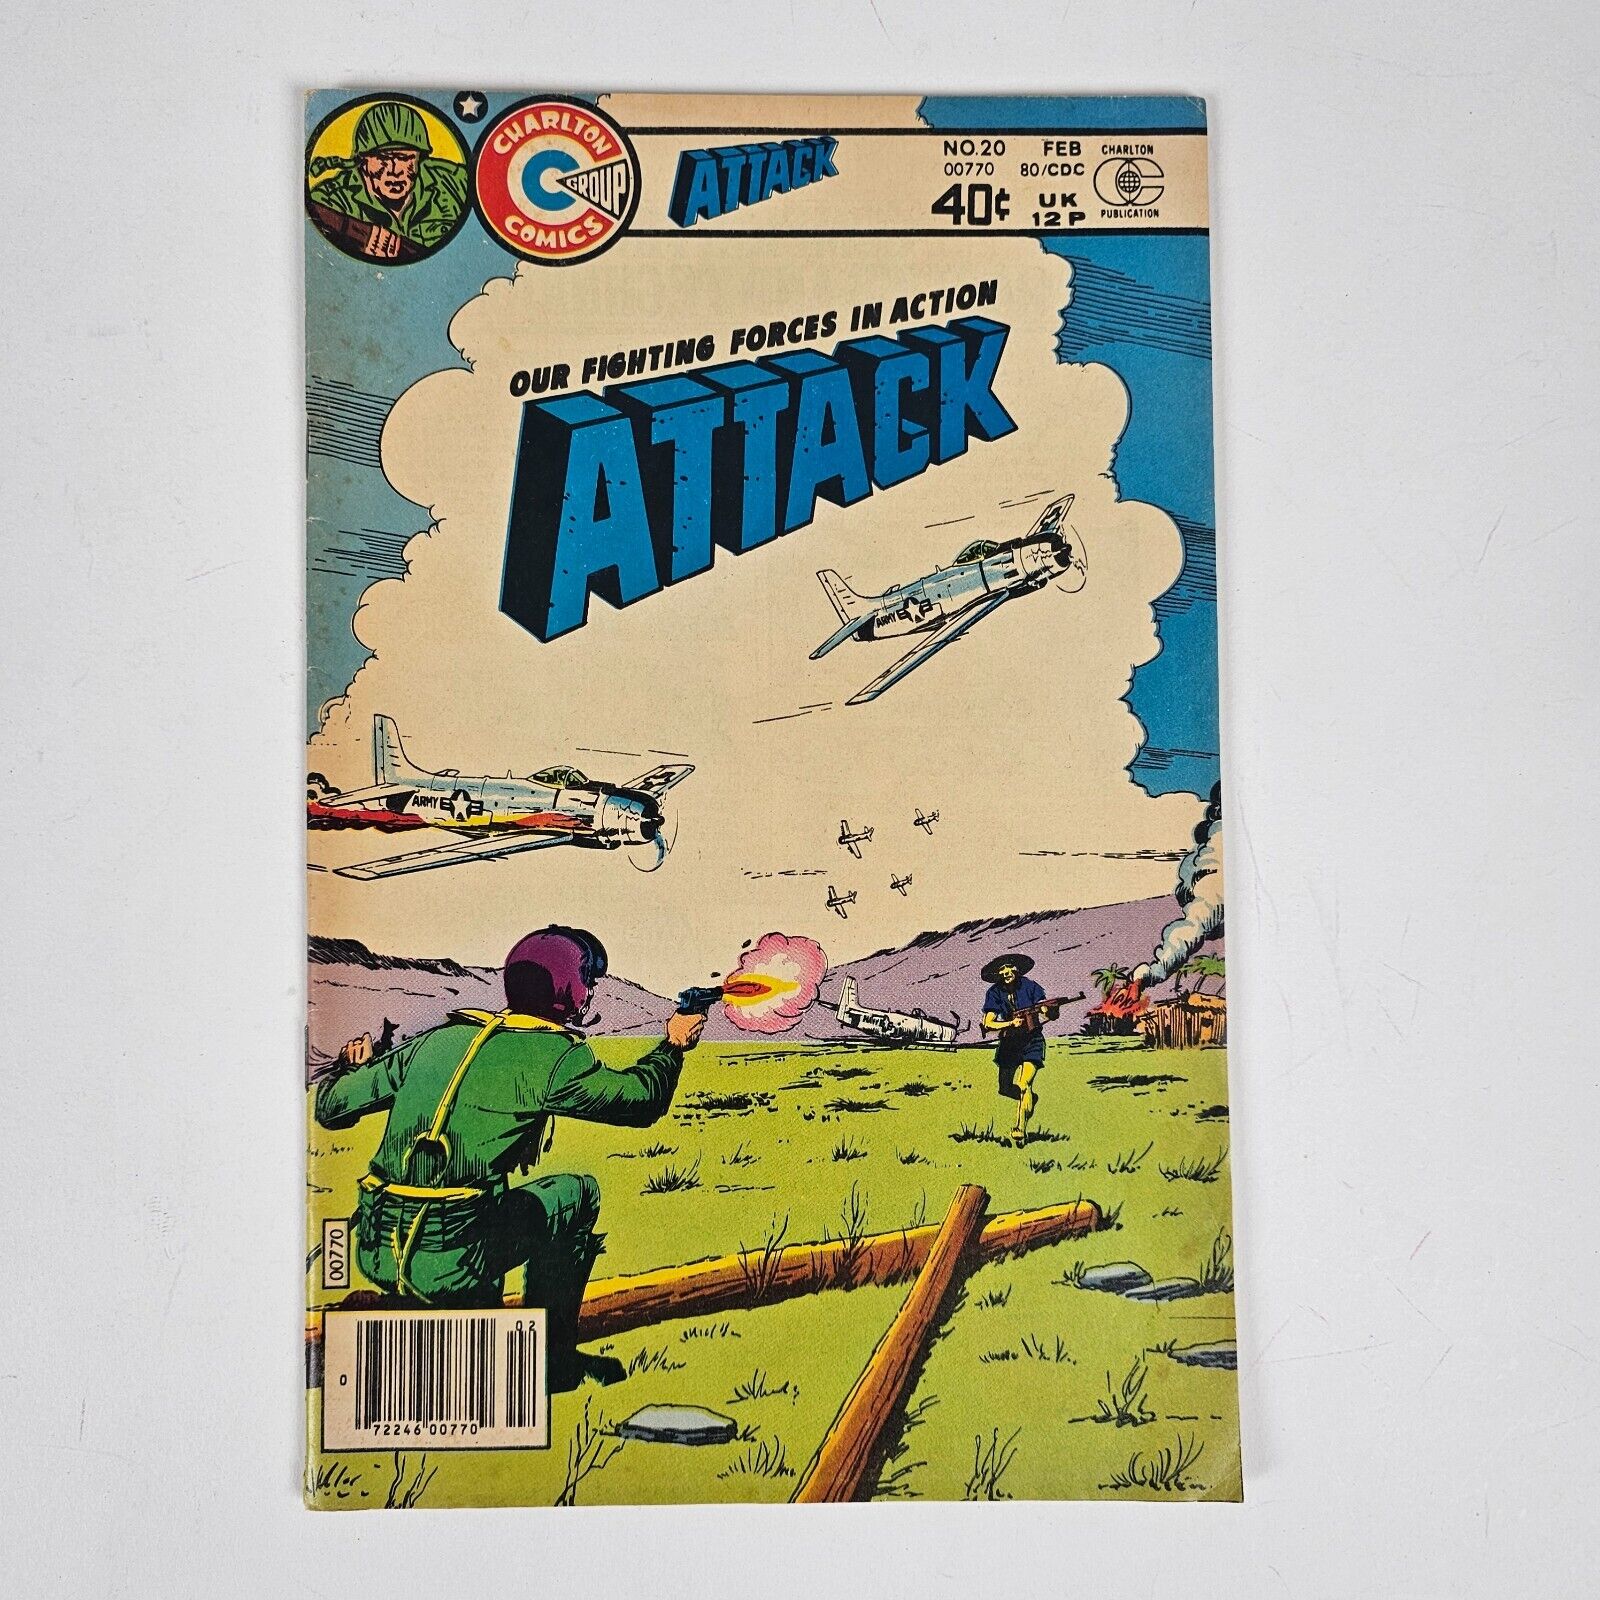 Attack #20 Volume 6, February 1980 Charlton Our Fighting Forces in Action War